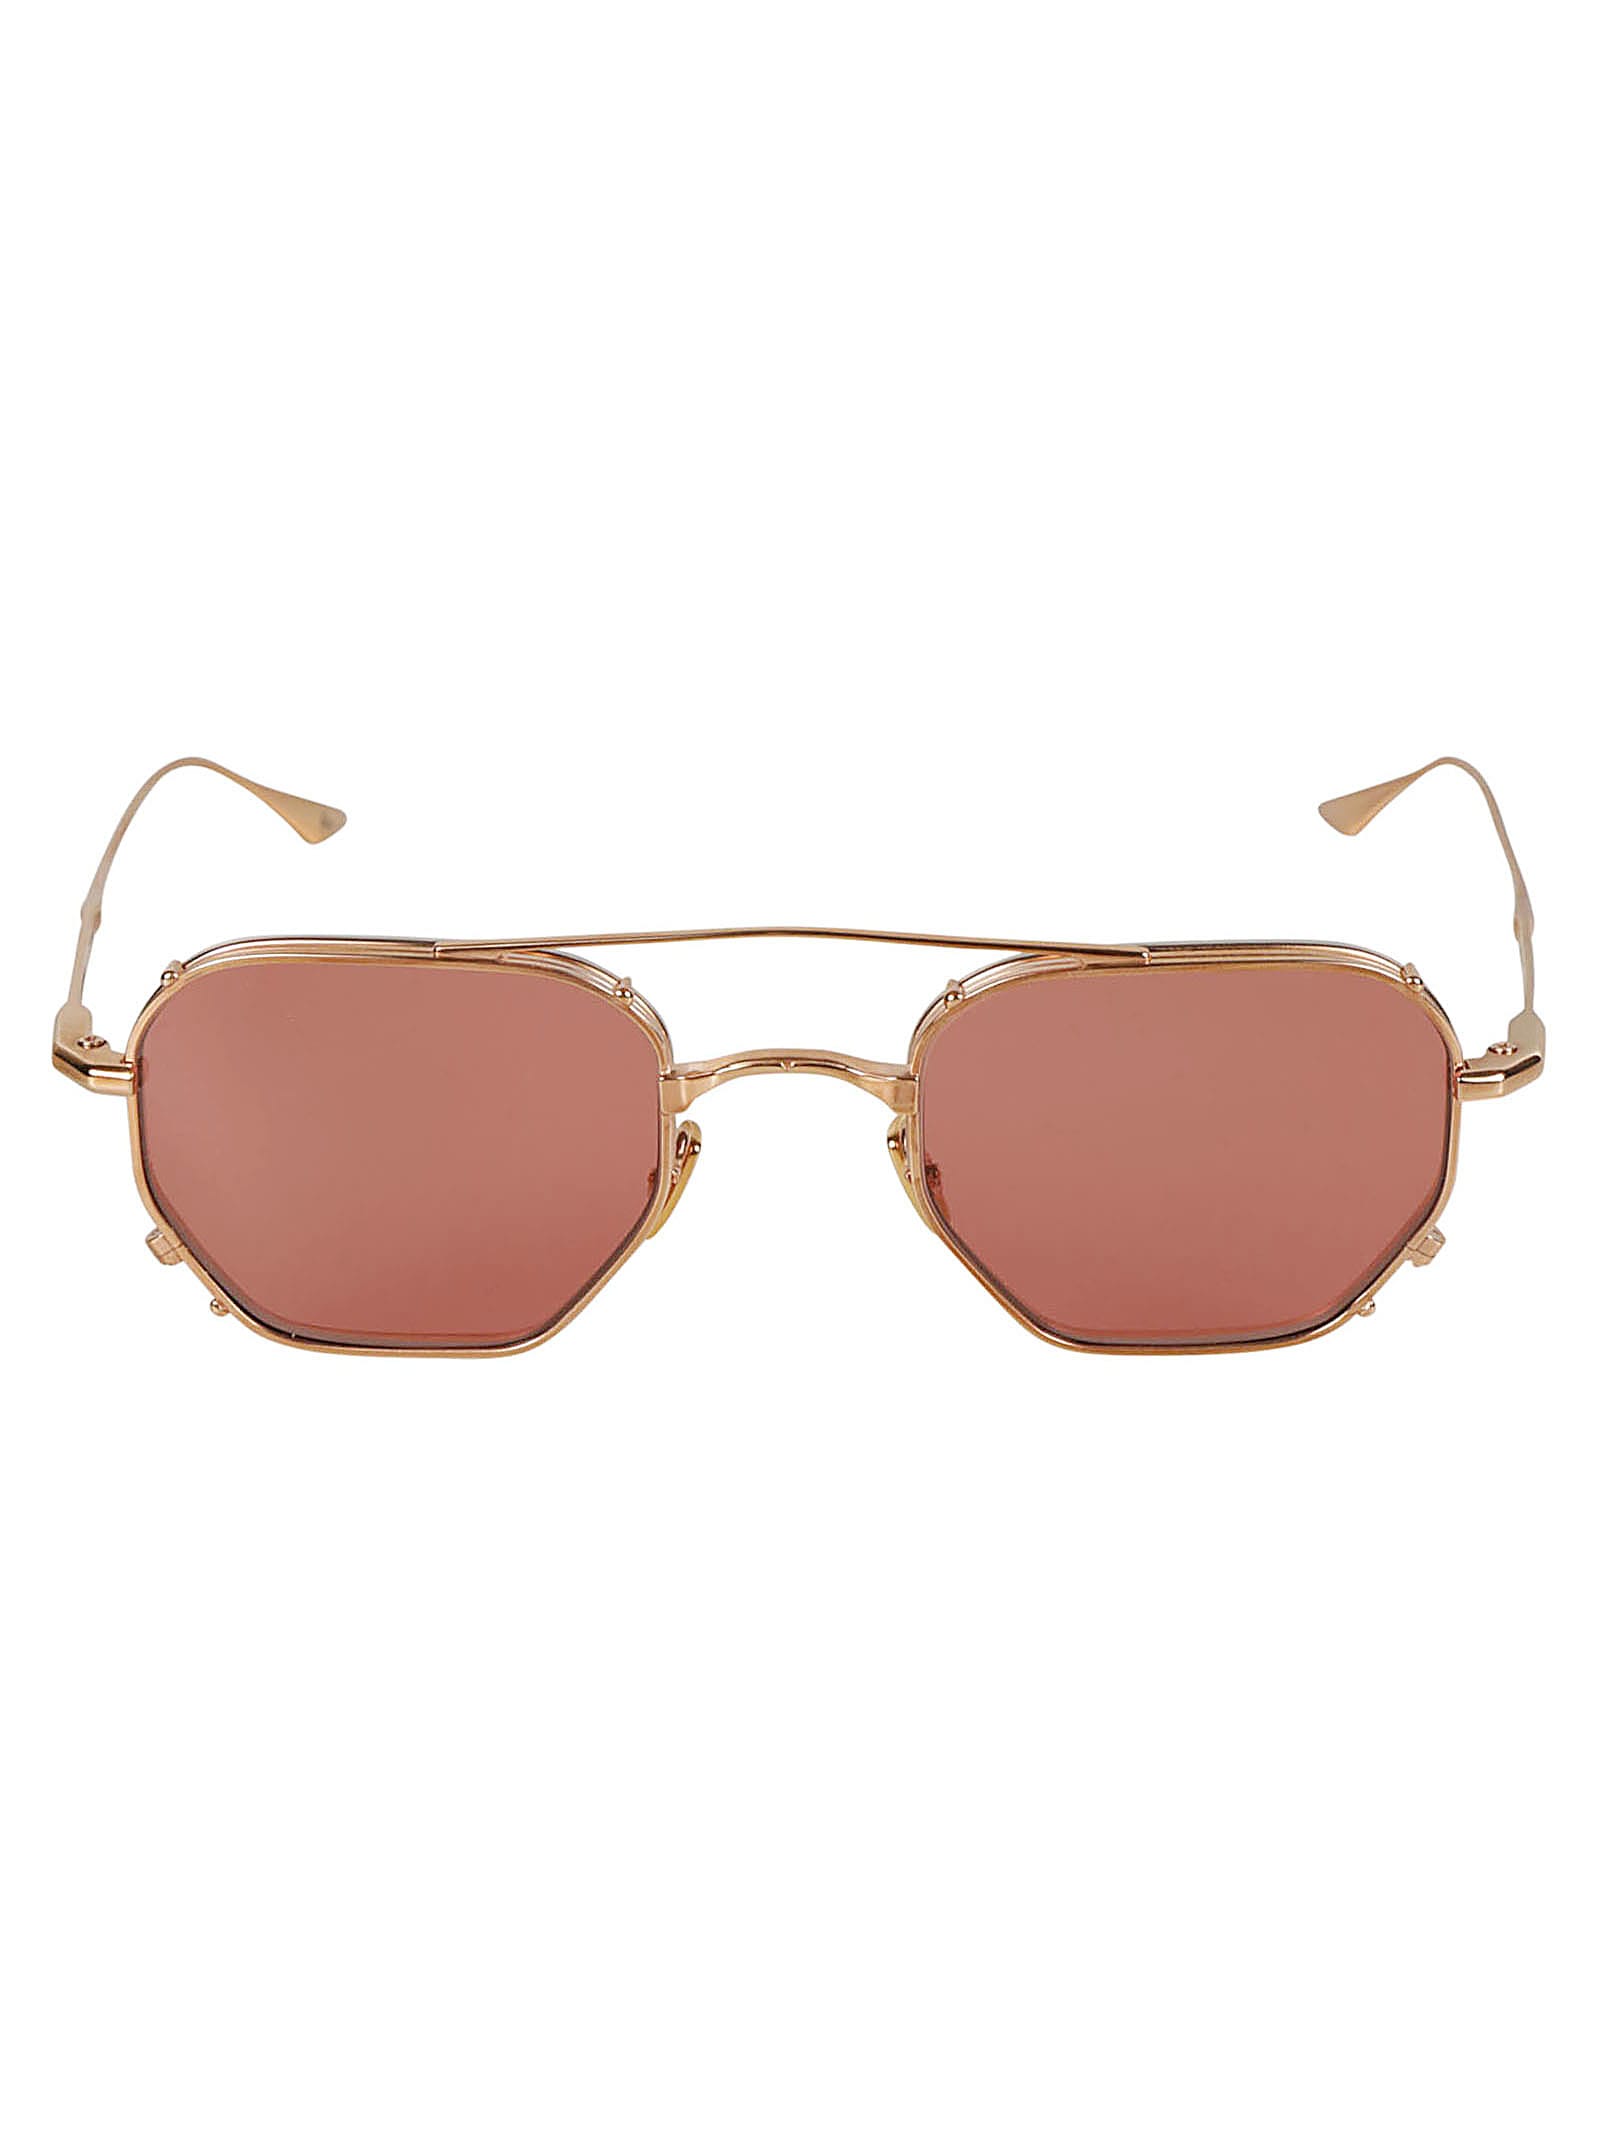 Jacques Marie Mage Marbot Sunglasses Sunglasses In Gold